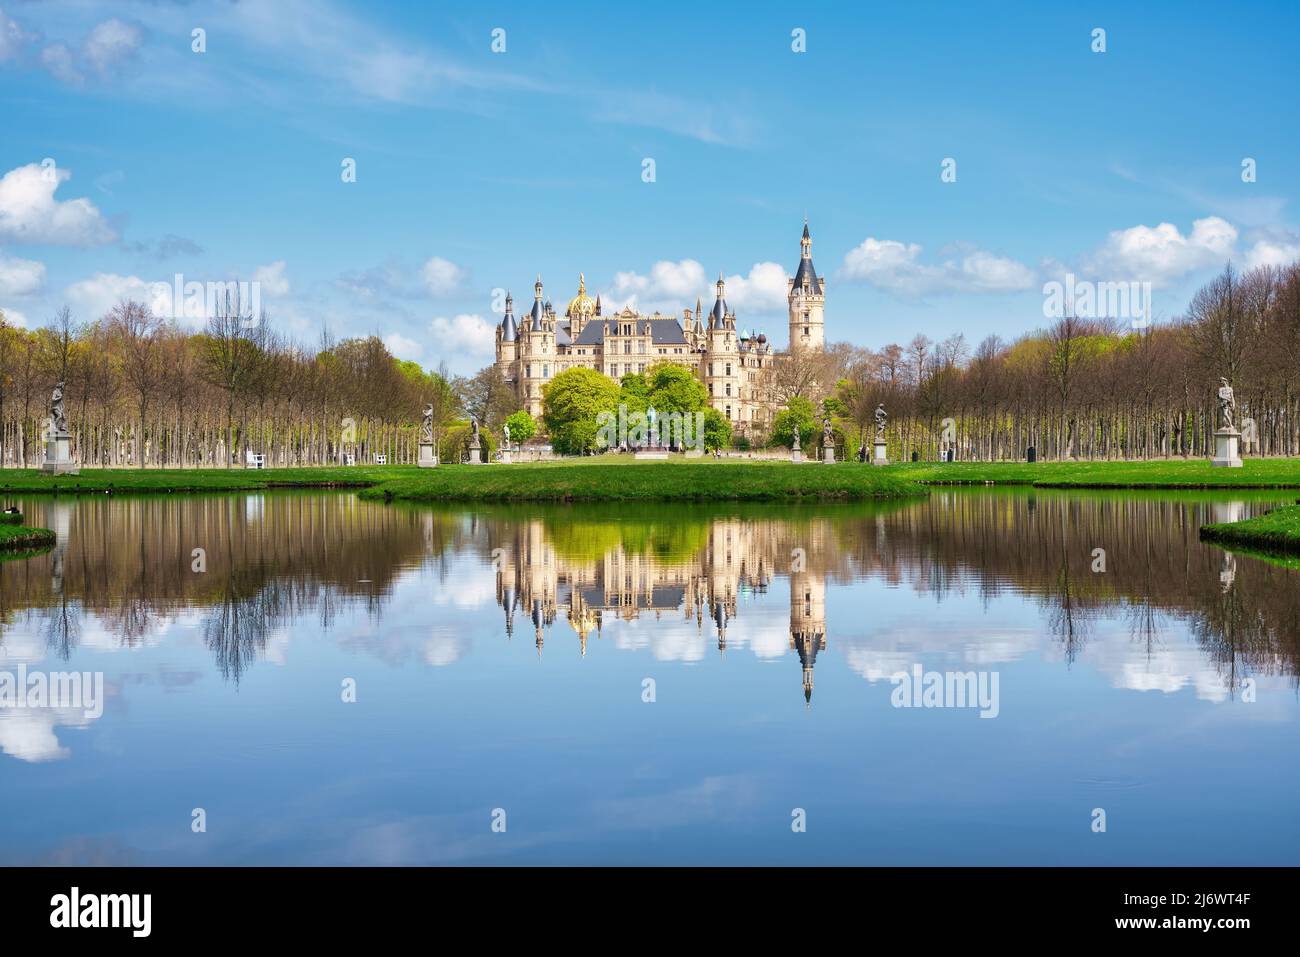 Castle in Schwerin, Germany. Capital of Mecklenburg-Vorpommern state, state parliament. Castle garden, with reflection in the water. Stock Photo